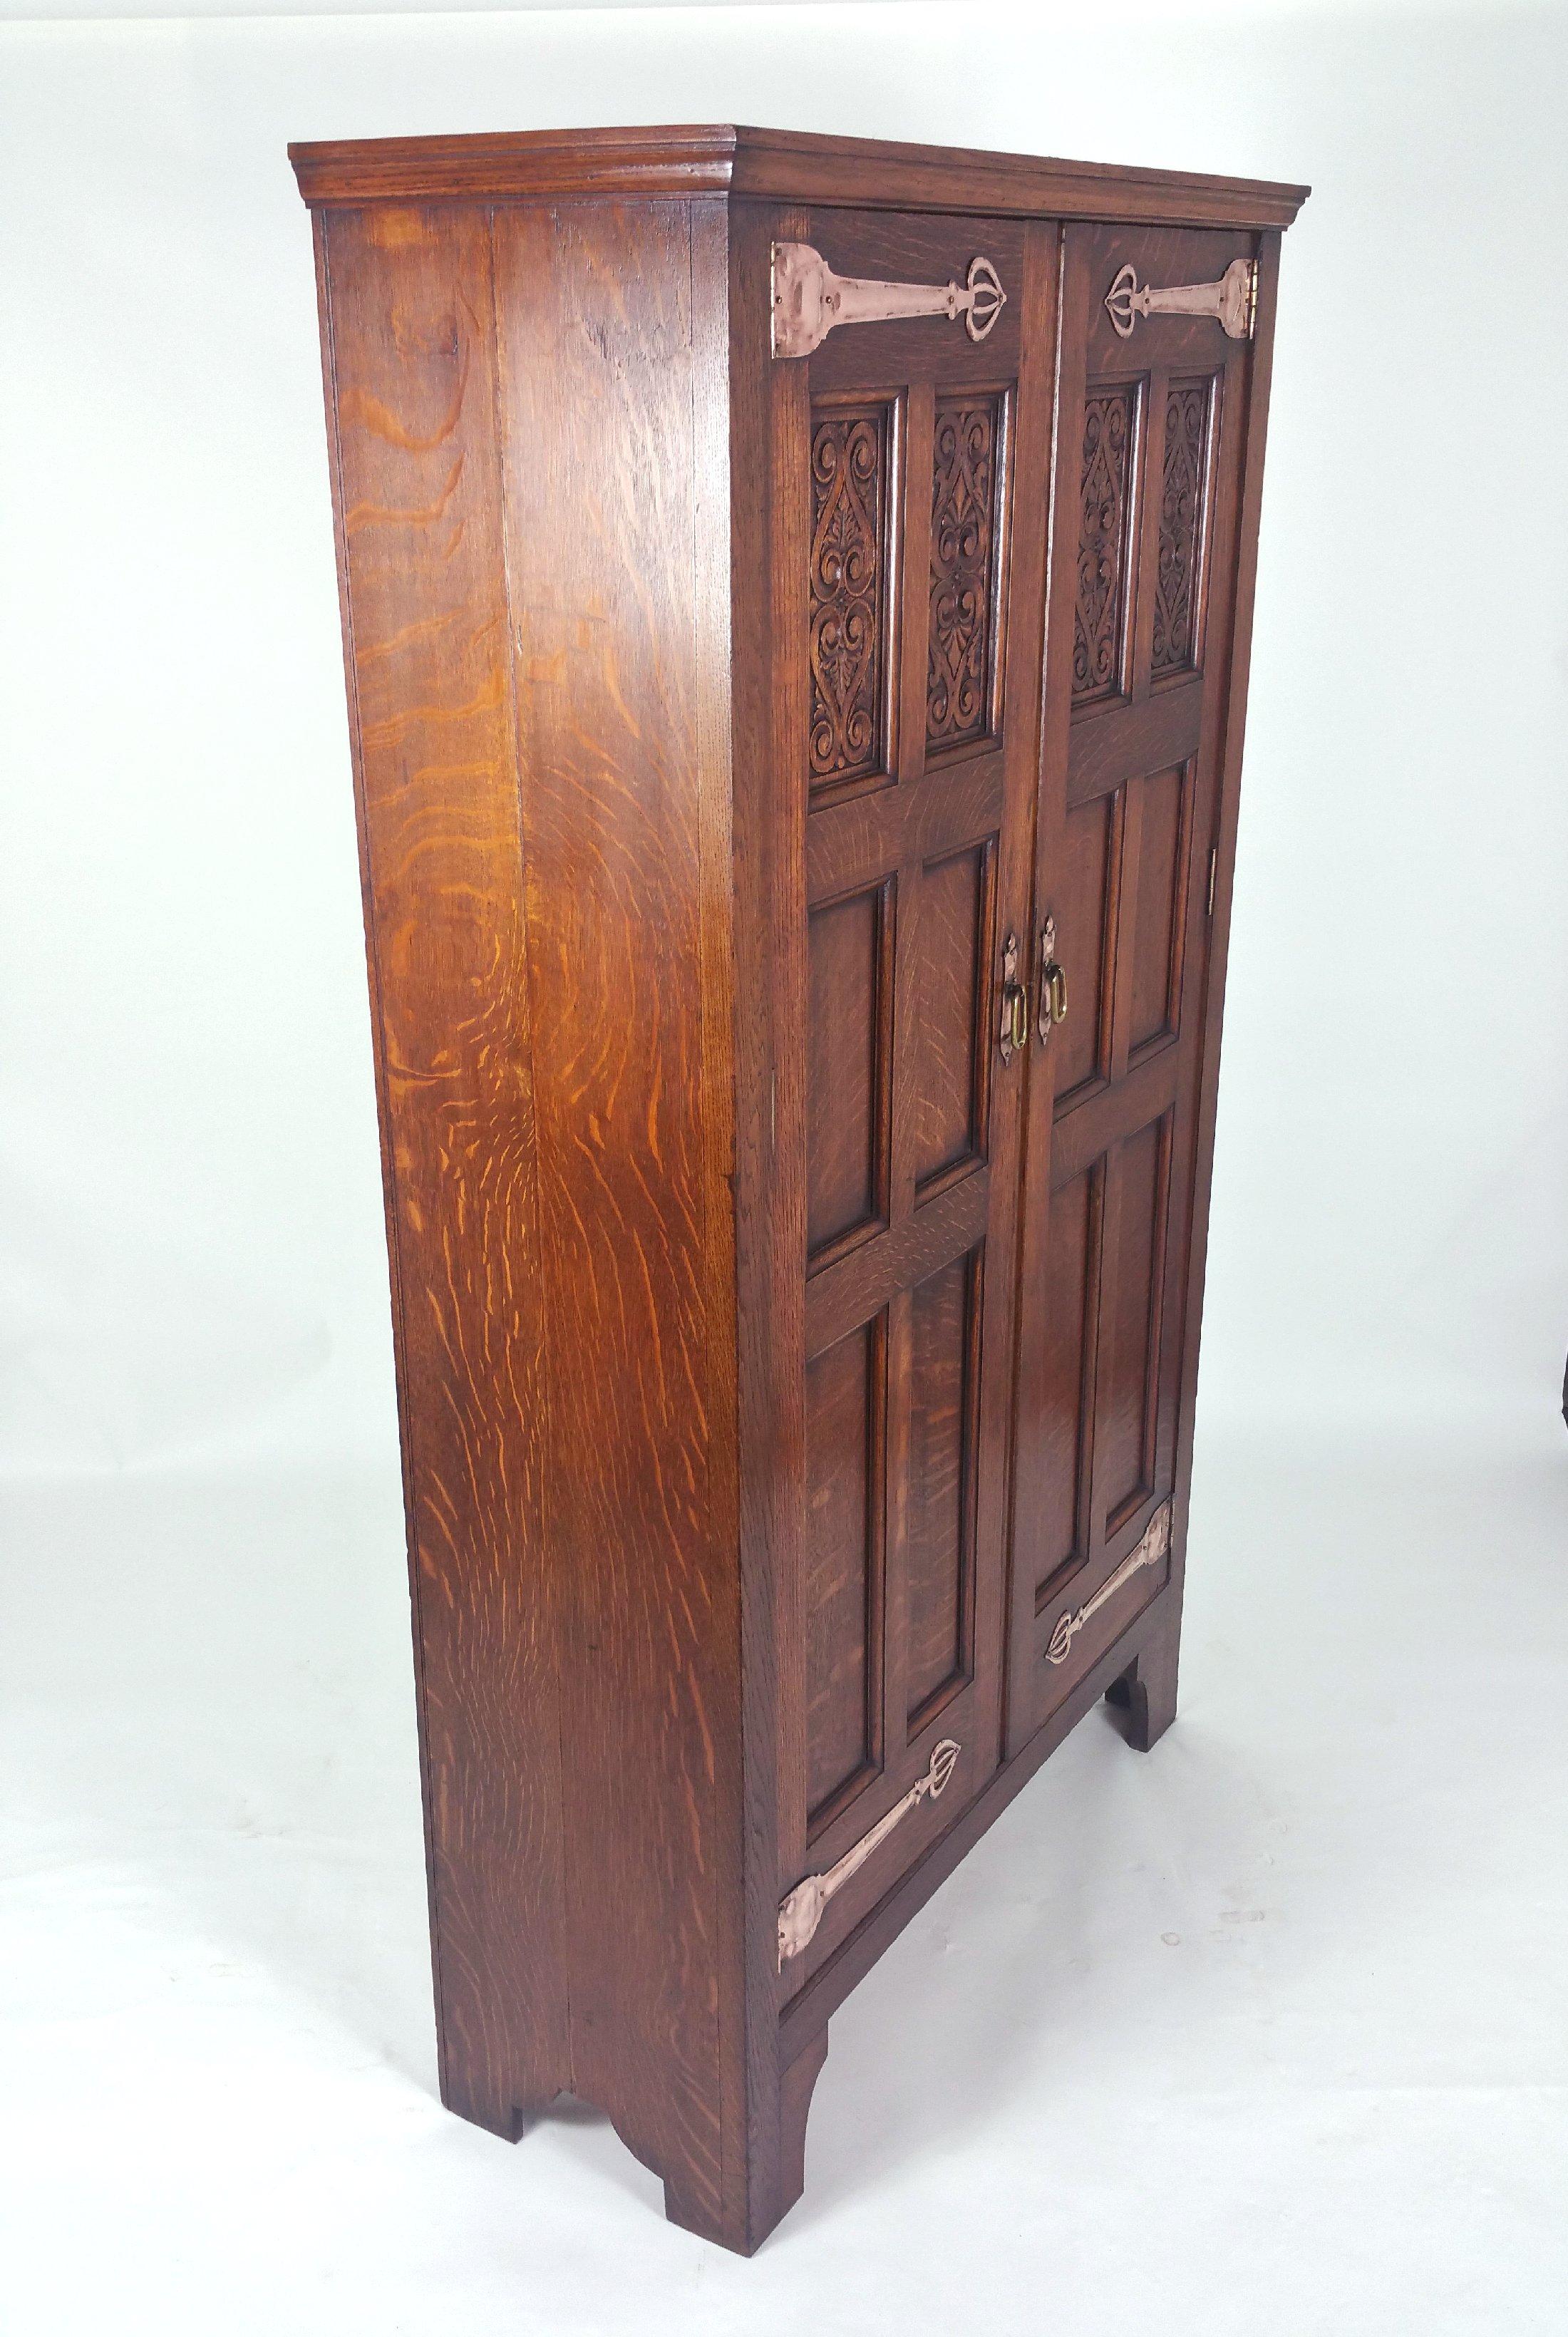 Late 19th Century Arts & Crafts Two-Door Hall Wardrobe with Ornate Mounts In Good Condition In London, west Sussex